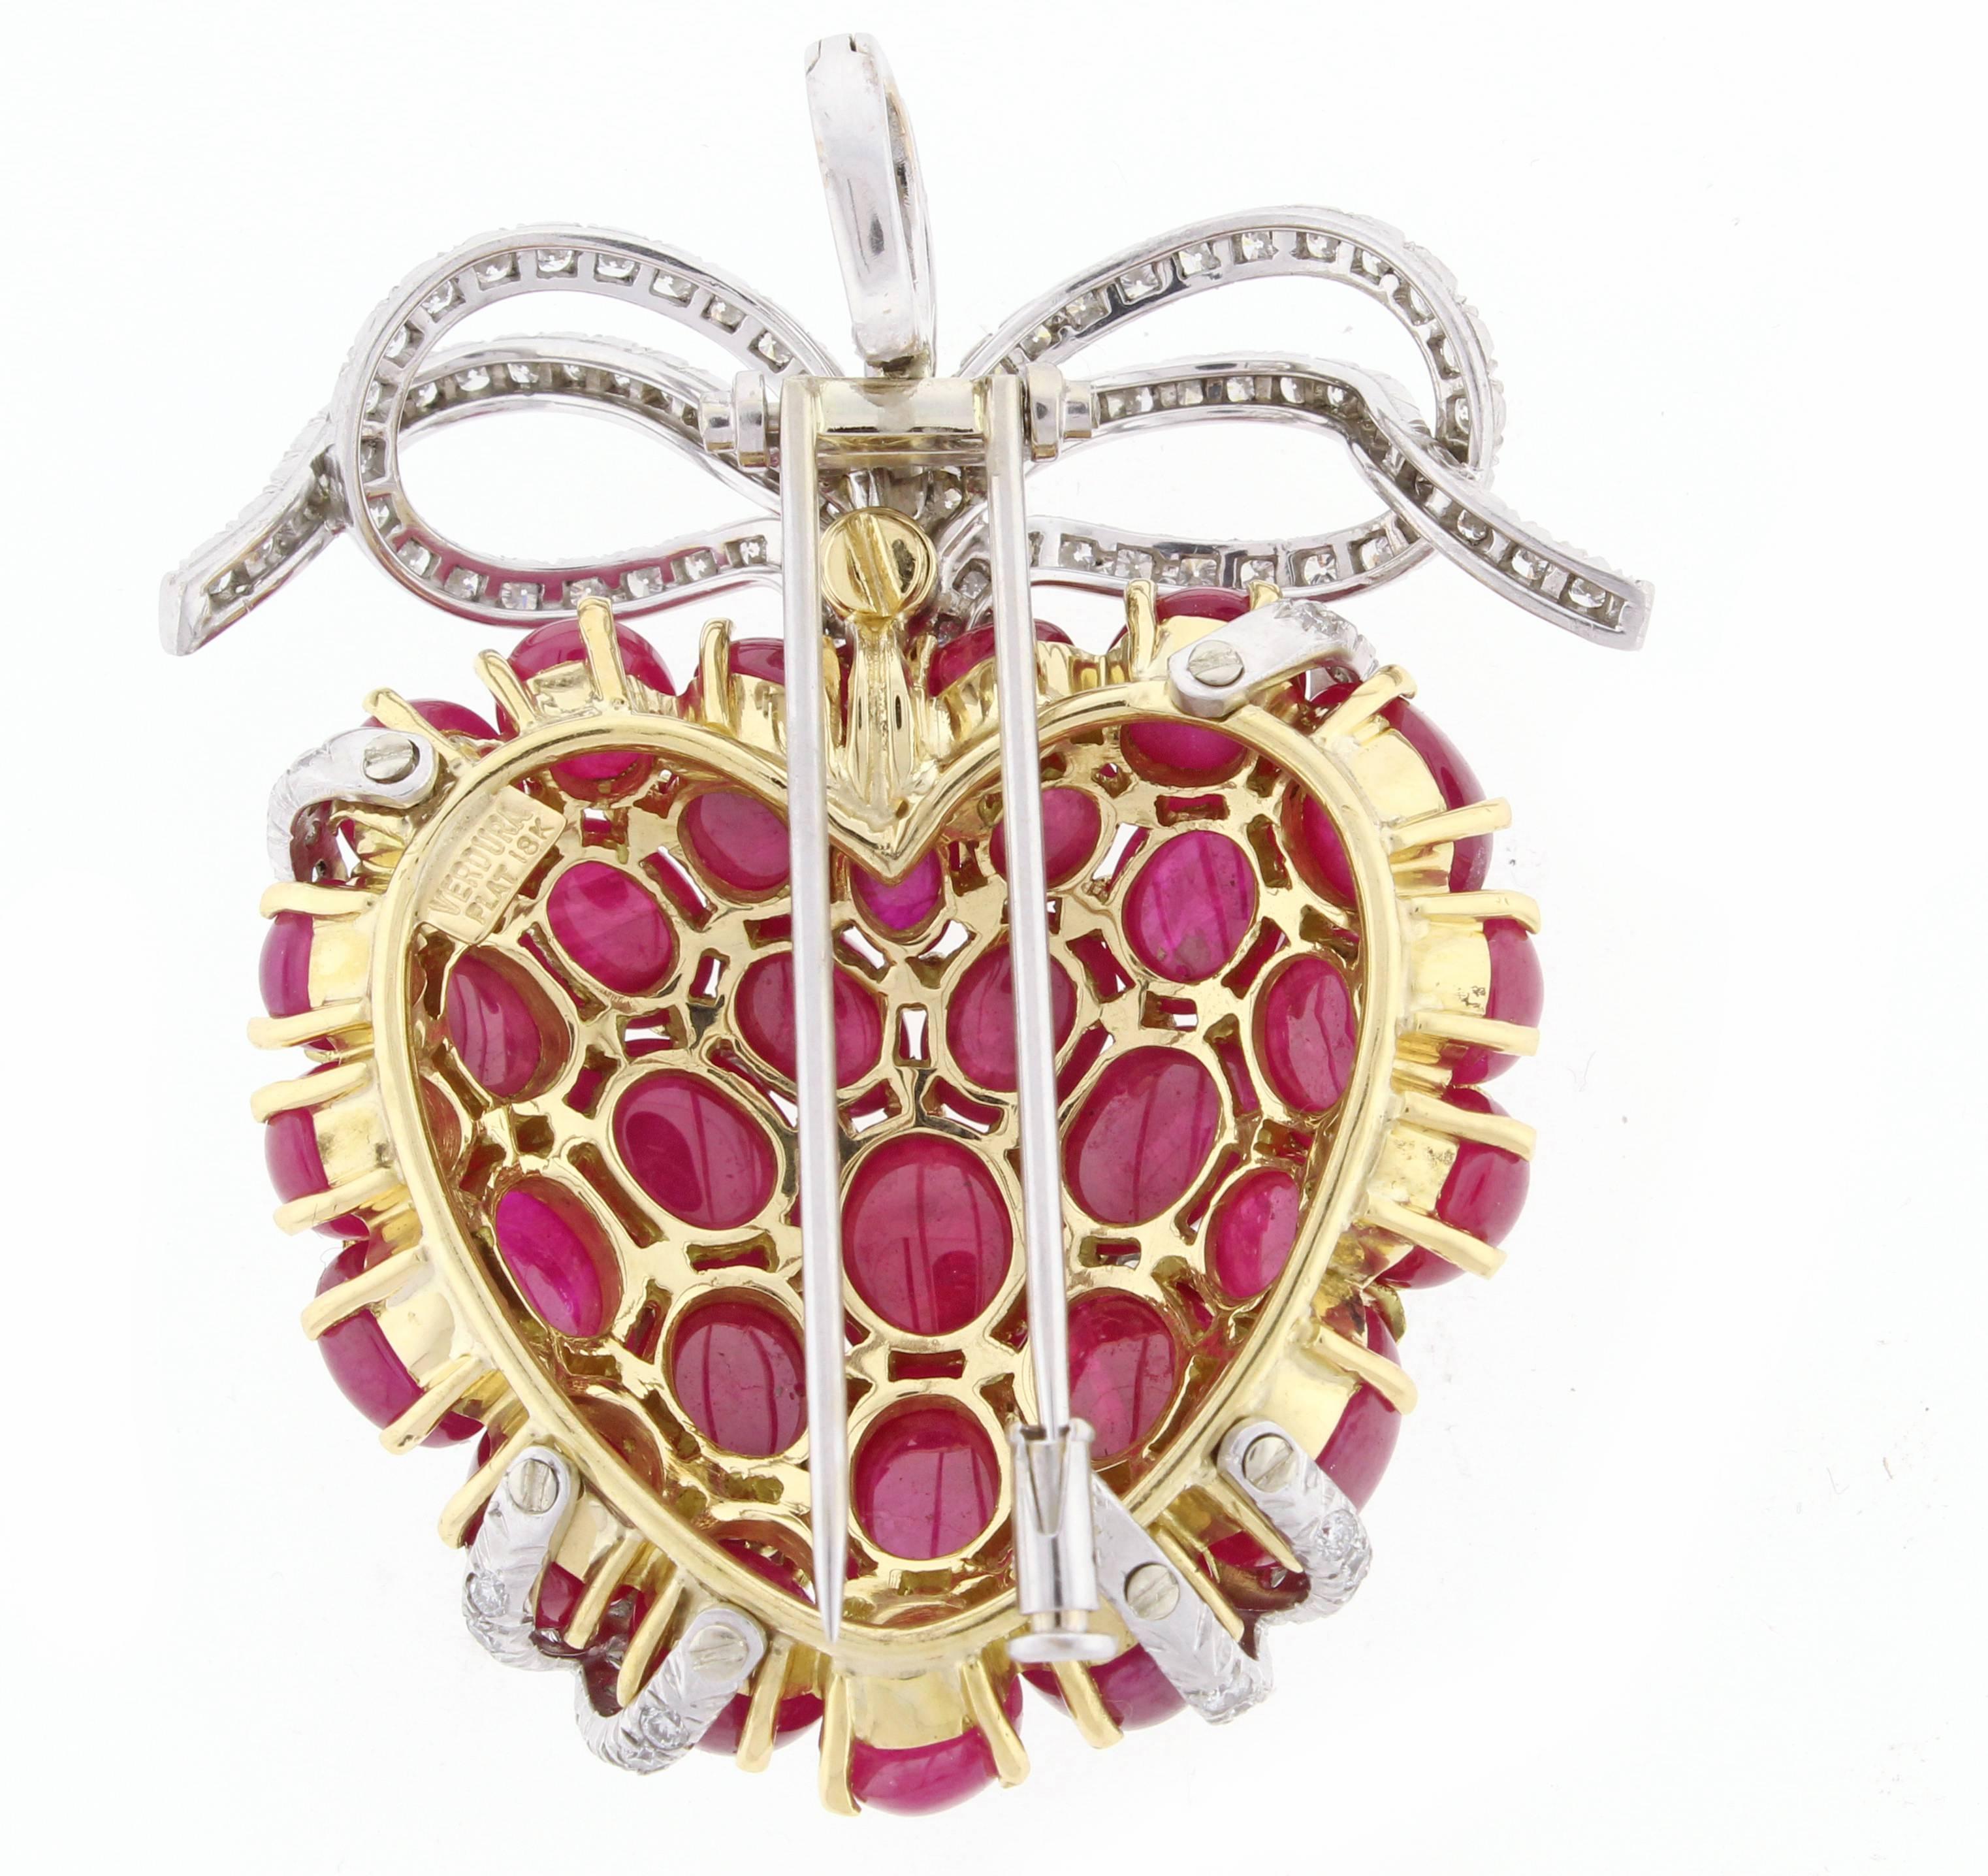 The wrapped heart design was commissioned by Hollywood legend Tyrone Power, who asked the Duke to “gift wrap” his heart to give his wife Annabella on Christmas, 1941. The resulting “Wrapped” Heart Brooch design celebrates its 75th anniversary this